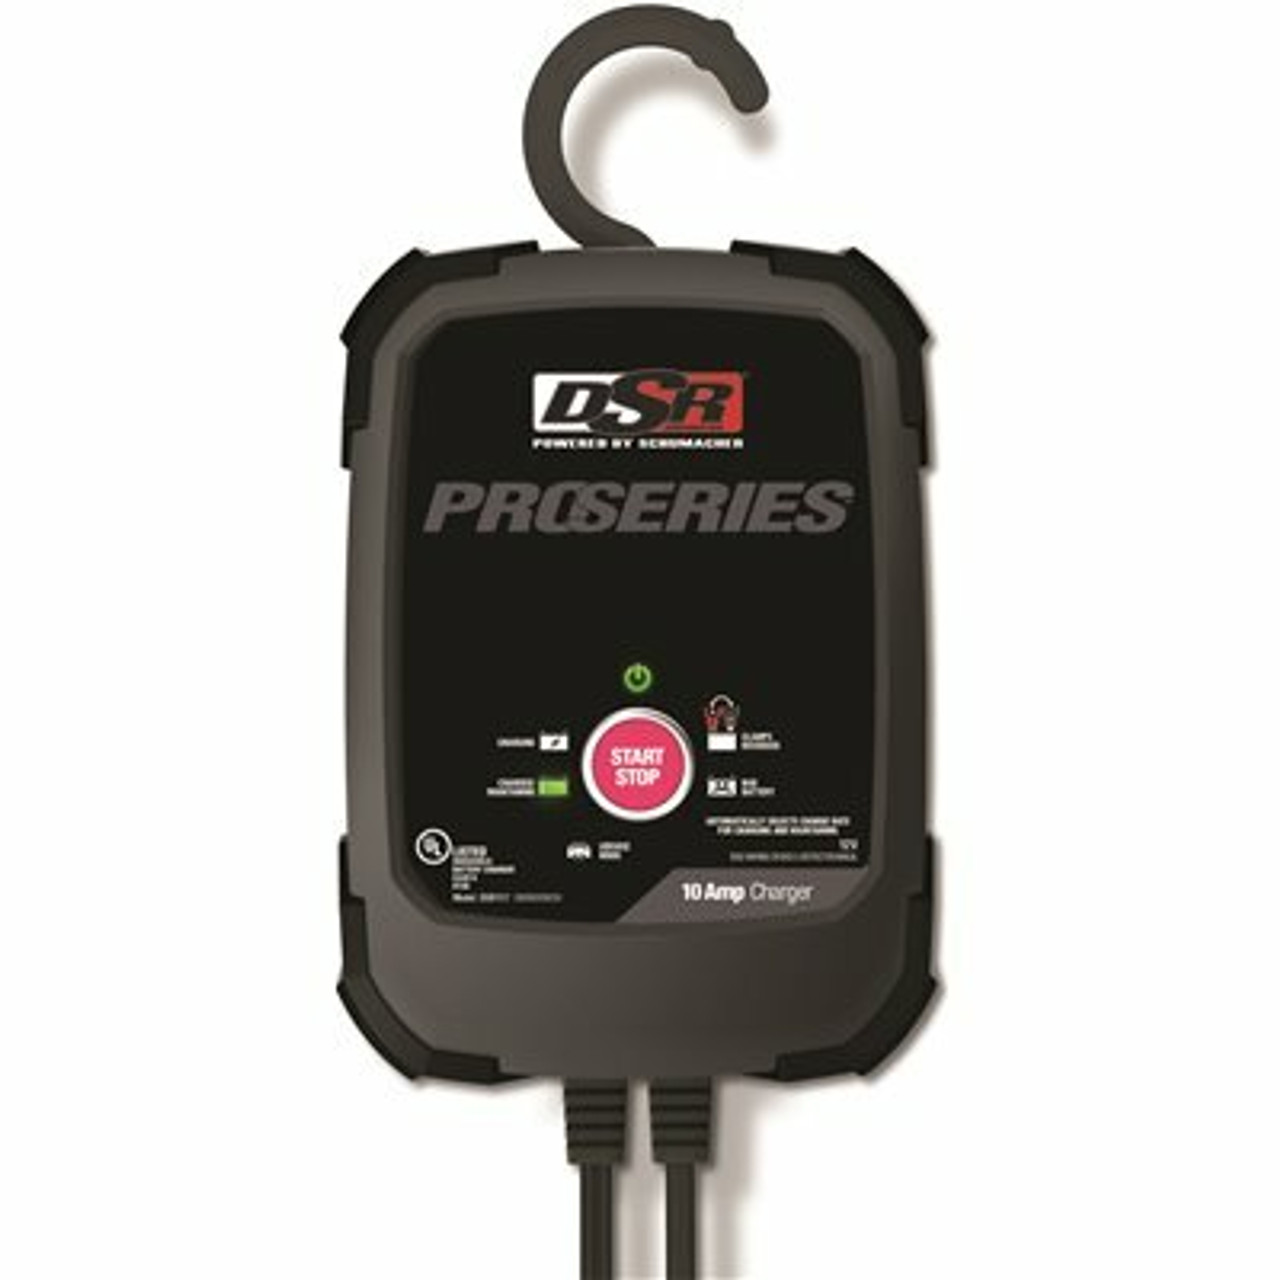 Schumacher Proseries 10 Amp 12-Volt Rapid Battery Charger With Service Mode